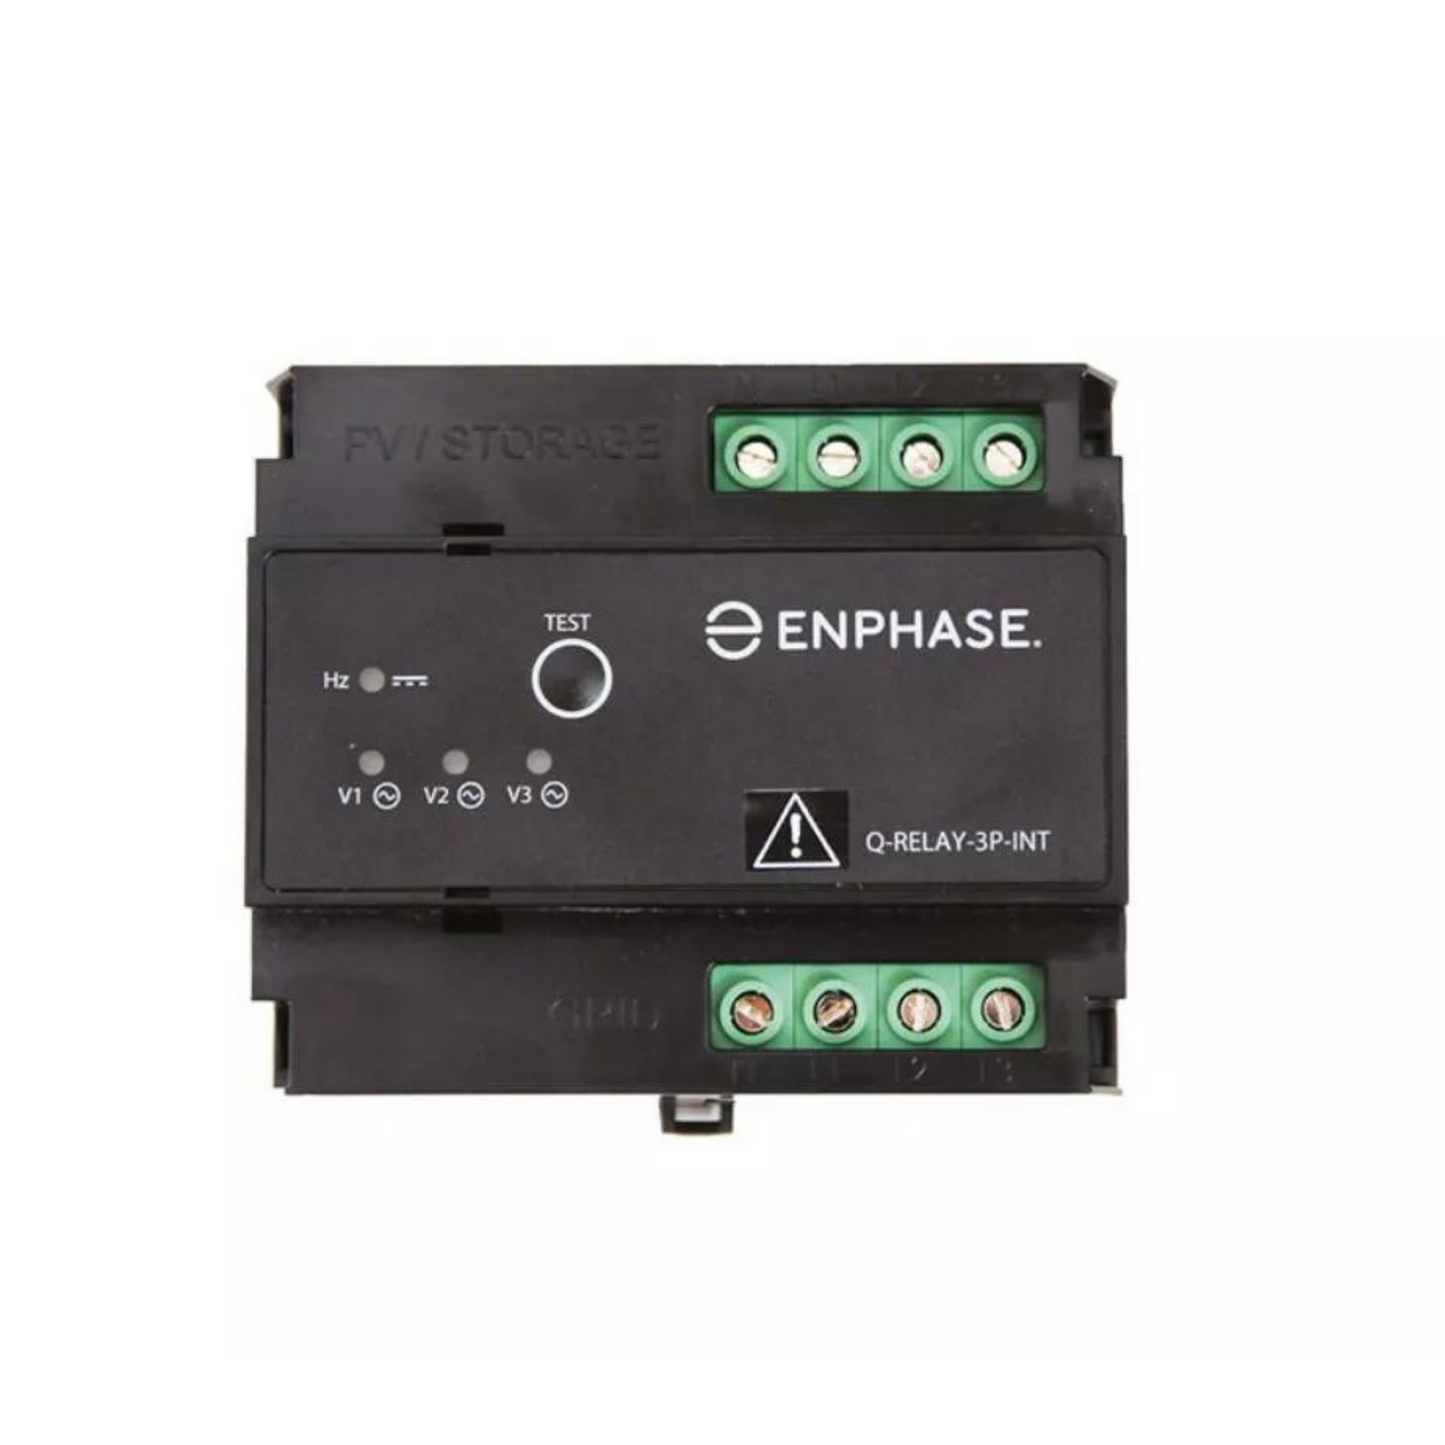 Enphase Energy - Q-RELAY-3P-INT GRID DISCONNECTOR Netztrennung (3-phasig)